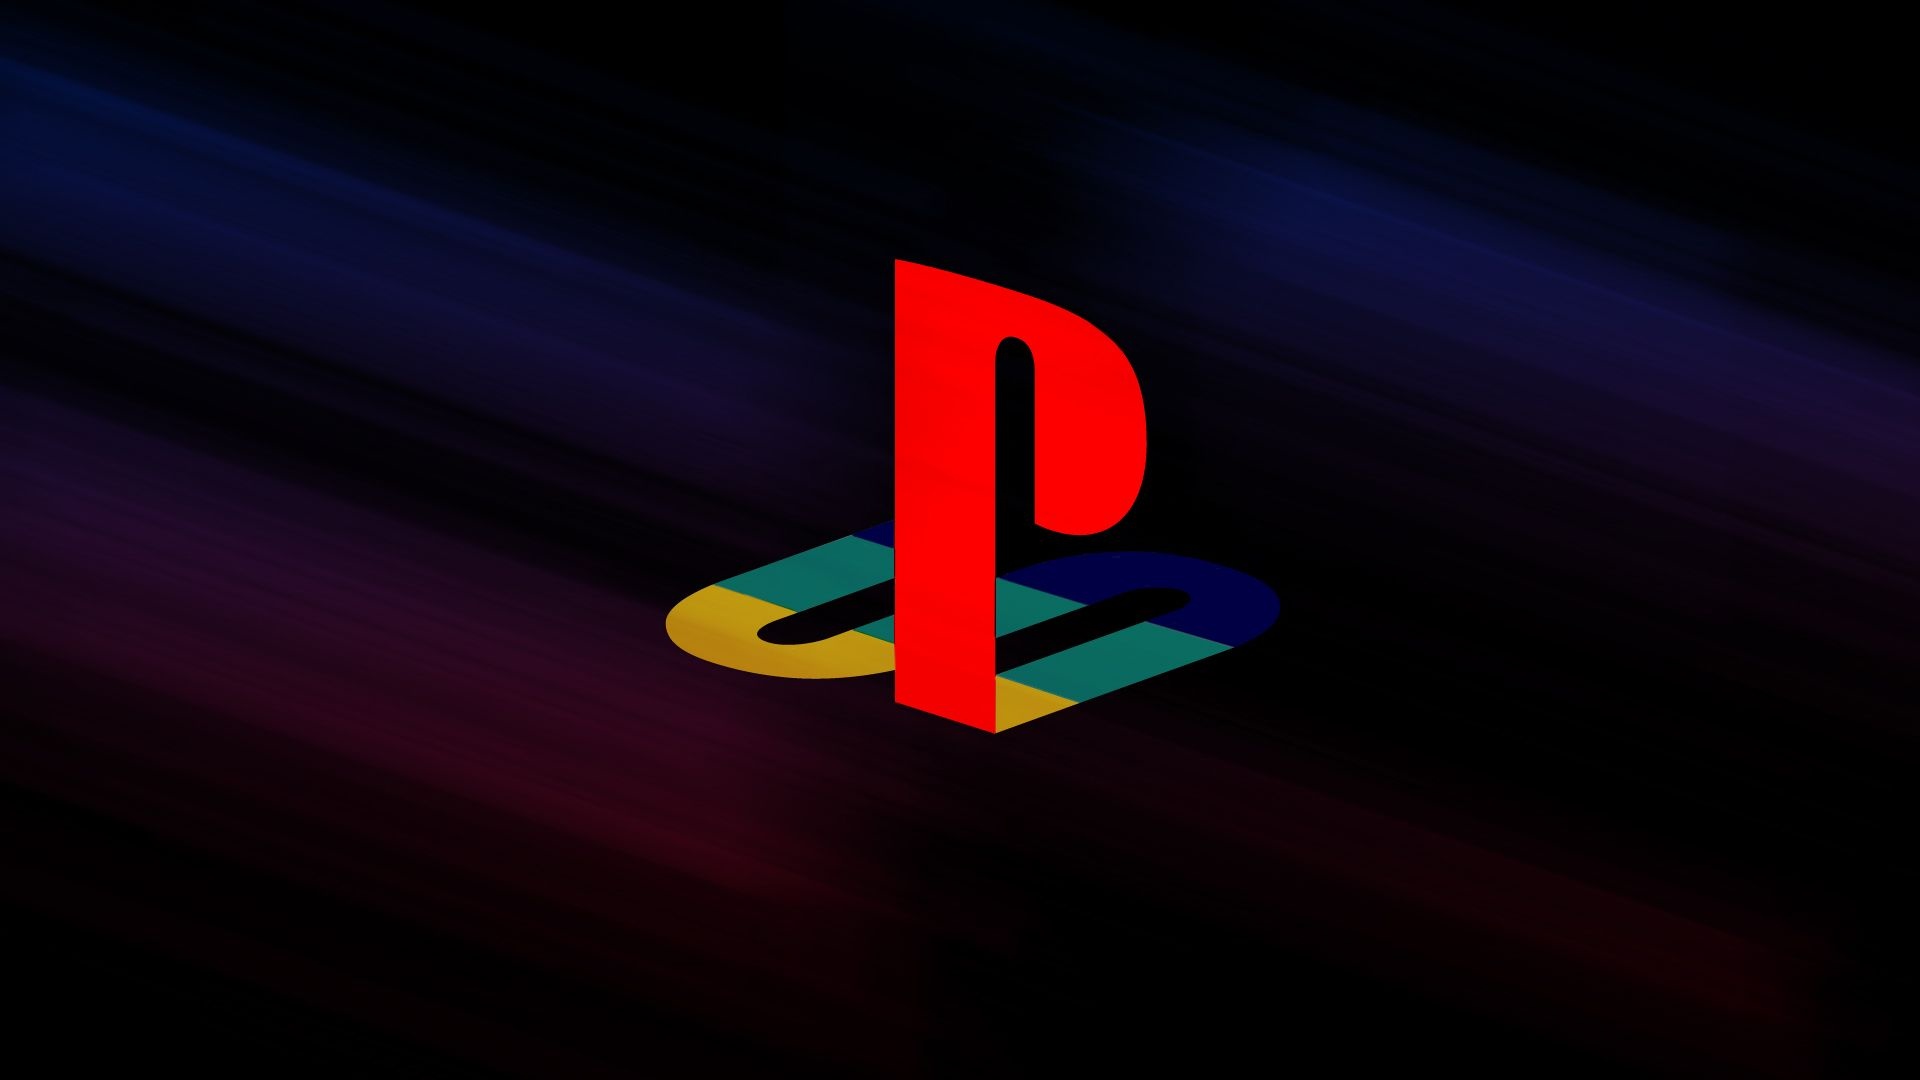 The PlayStation: A series of video game consoles, The first PS released in 1994. 1920x1080 Full HD Wallpaper.